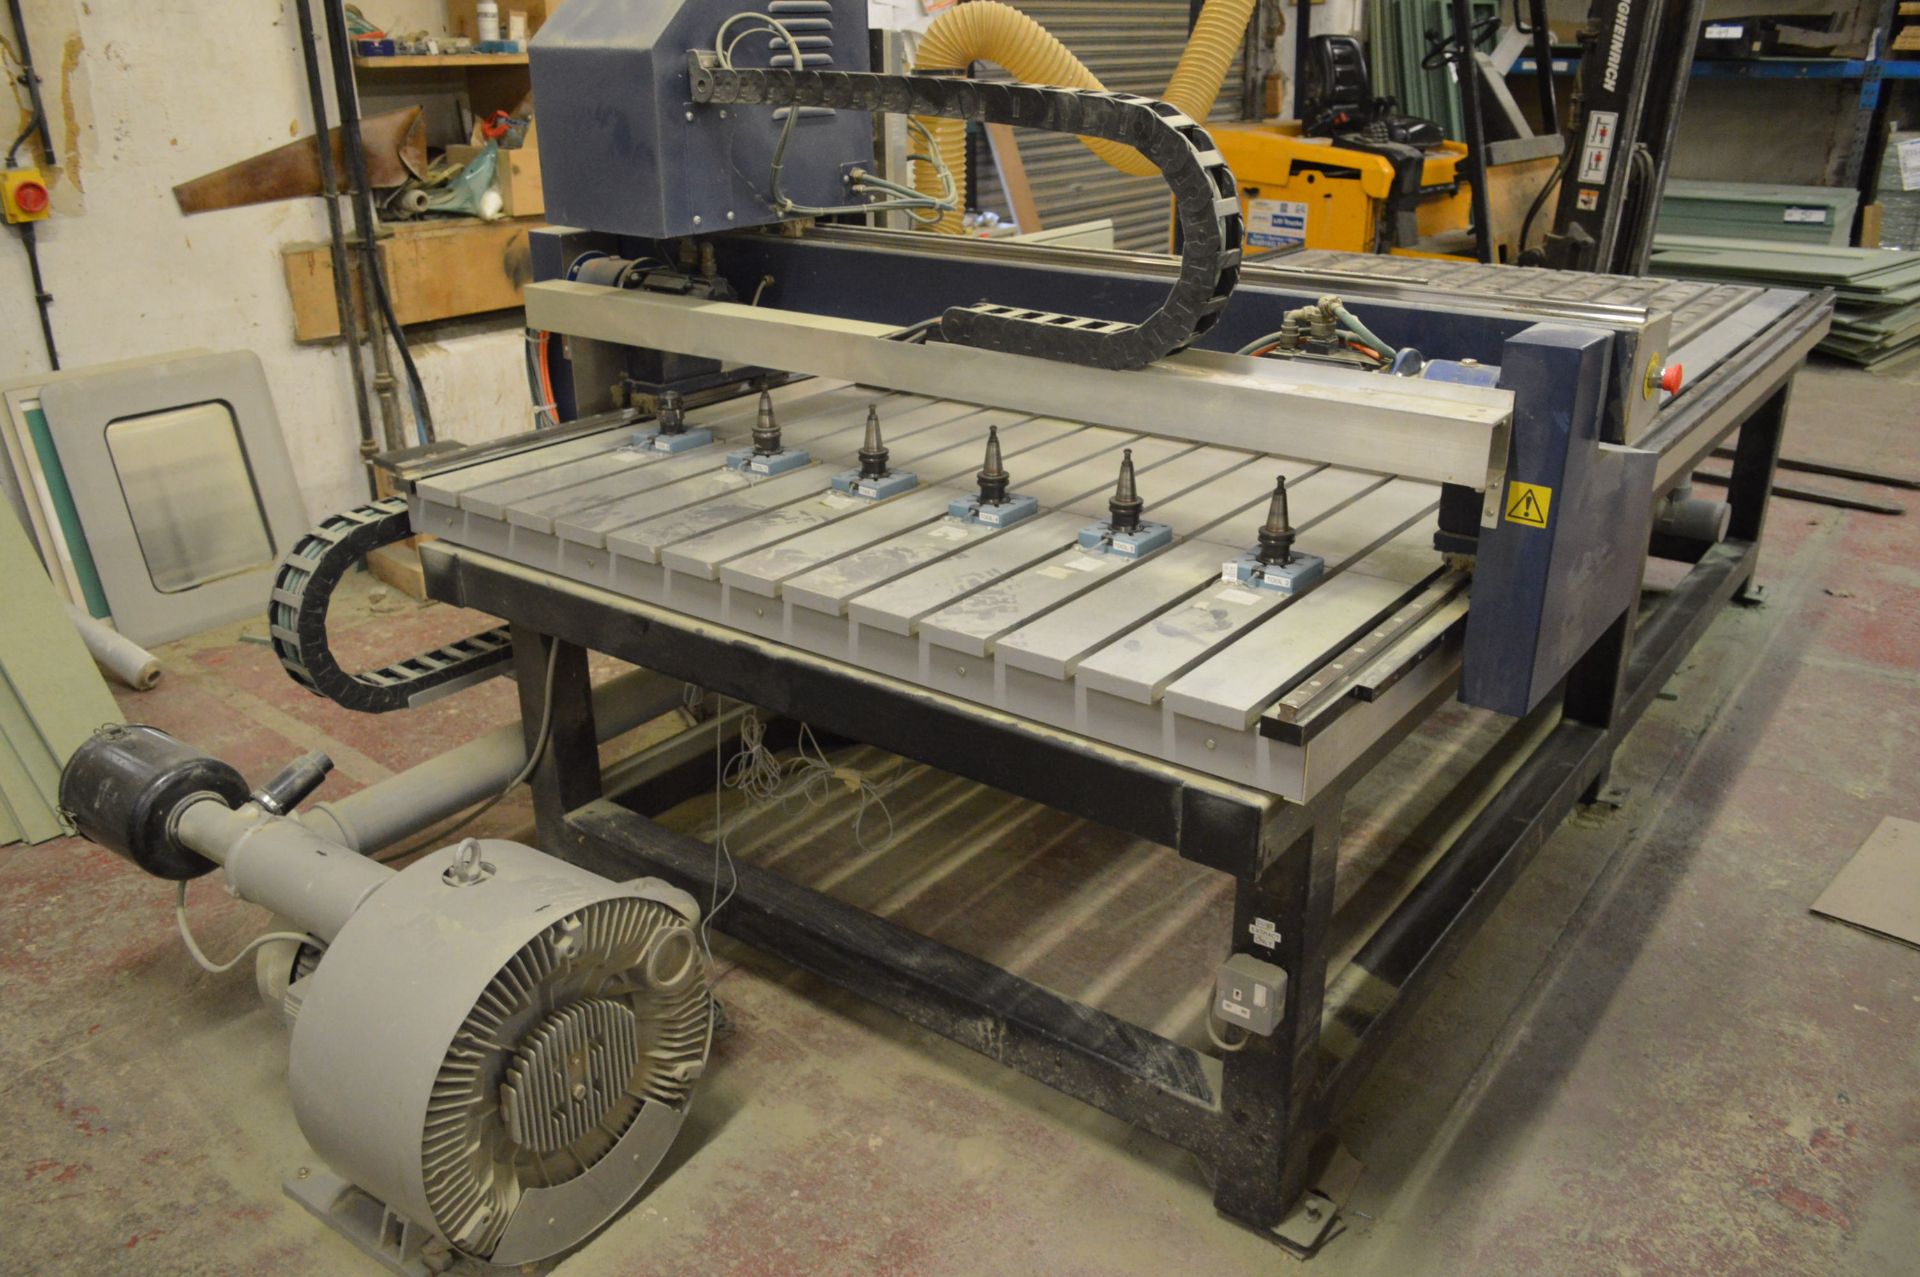 Central CNC1484D CNC ROUTER, serial no. 30/38245GT, with machining table, approx. 2.44m x 1.28m, E. - Image 4 of 8